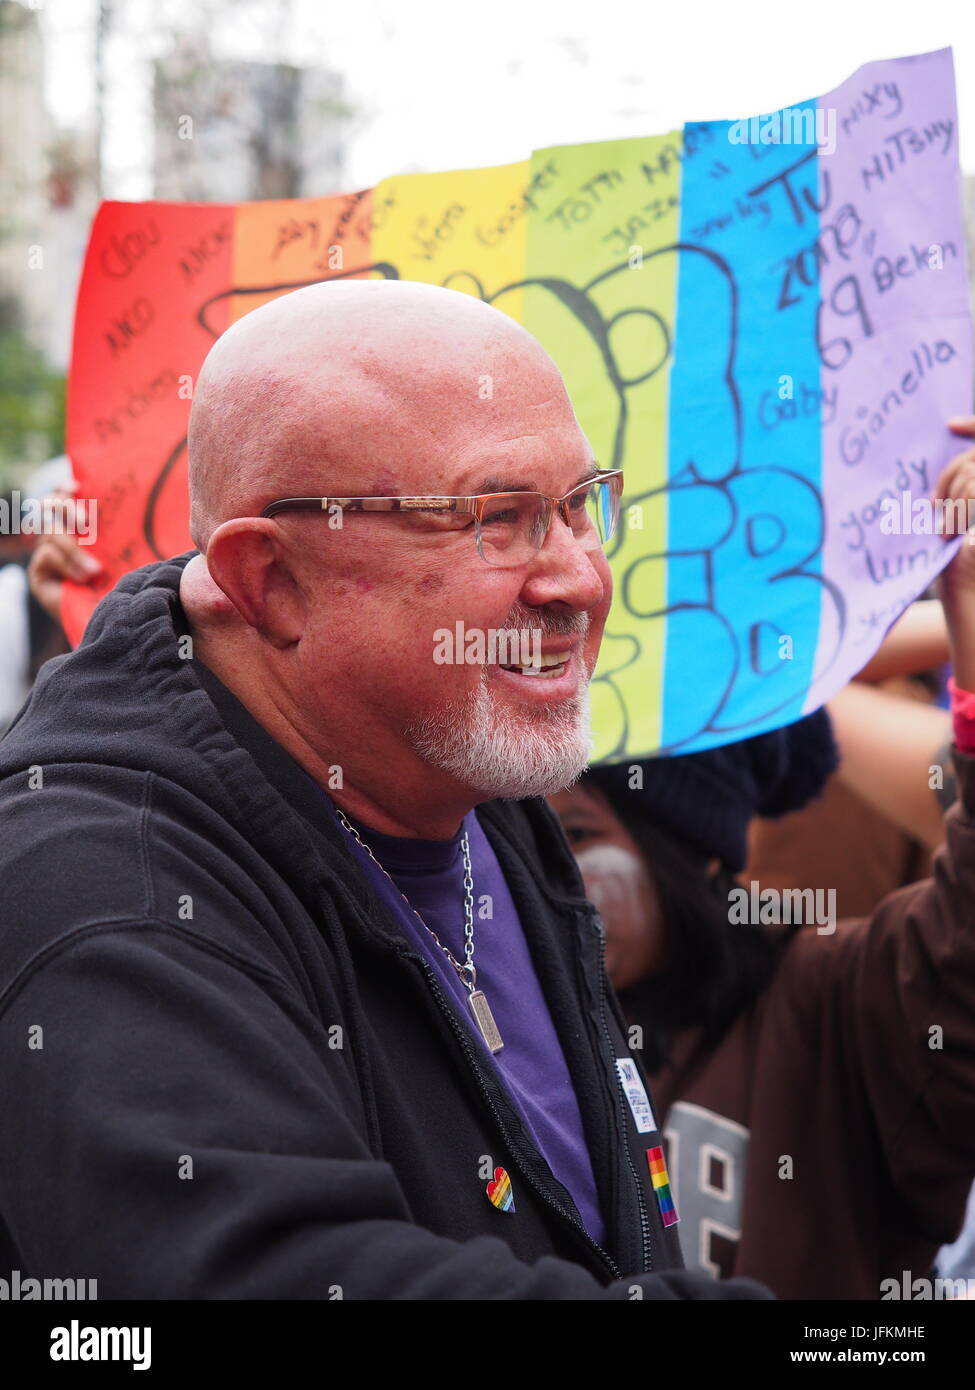 Lima, Peru. 01st July, 2017. Carlos Bruce, Peruvian congressman, leading the Pride Parade. Thousands of activists from the LGBT community and sympathizers participated in the pride parade Lima 2017 in search of recognition of their civil rights and against discrimination. Credit: Fotoholica Press Agency/Alamy Live News Stock Photo